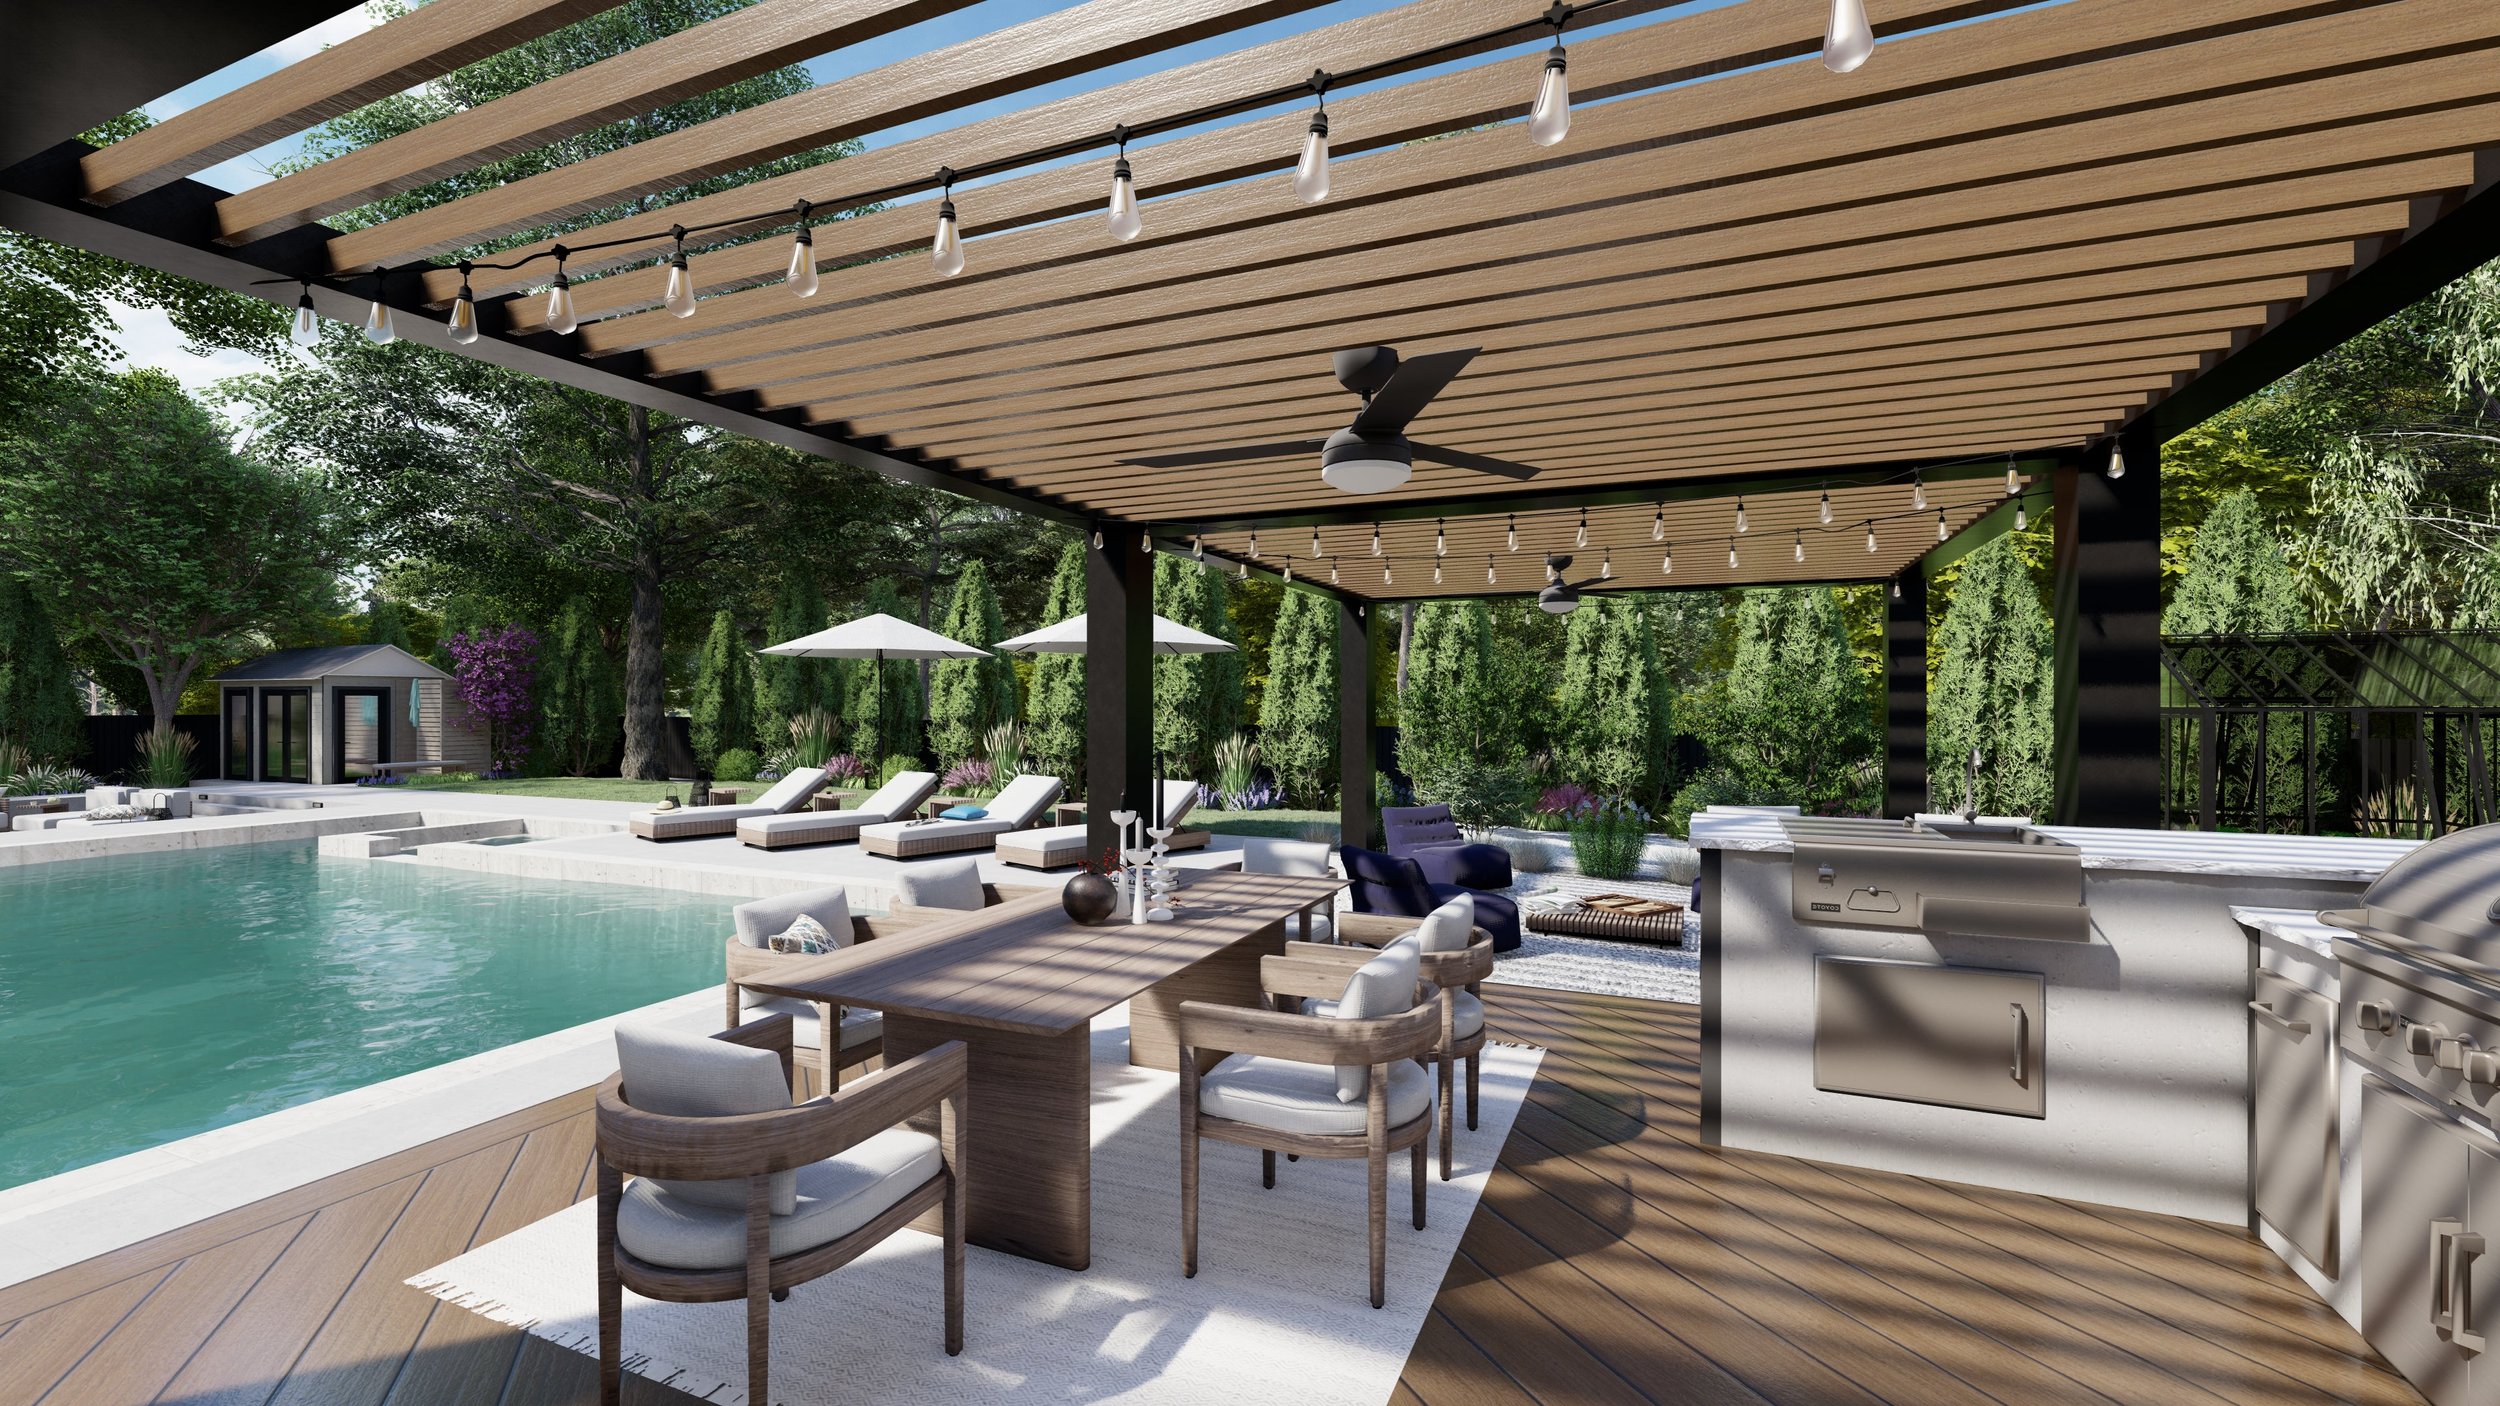 The Balmain dining set looks refined poolside in a backyard design for our client in Scarsdale, NY.